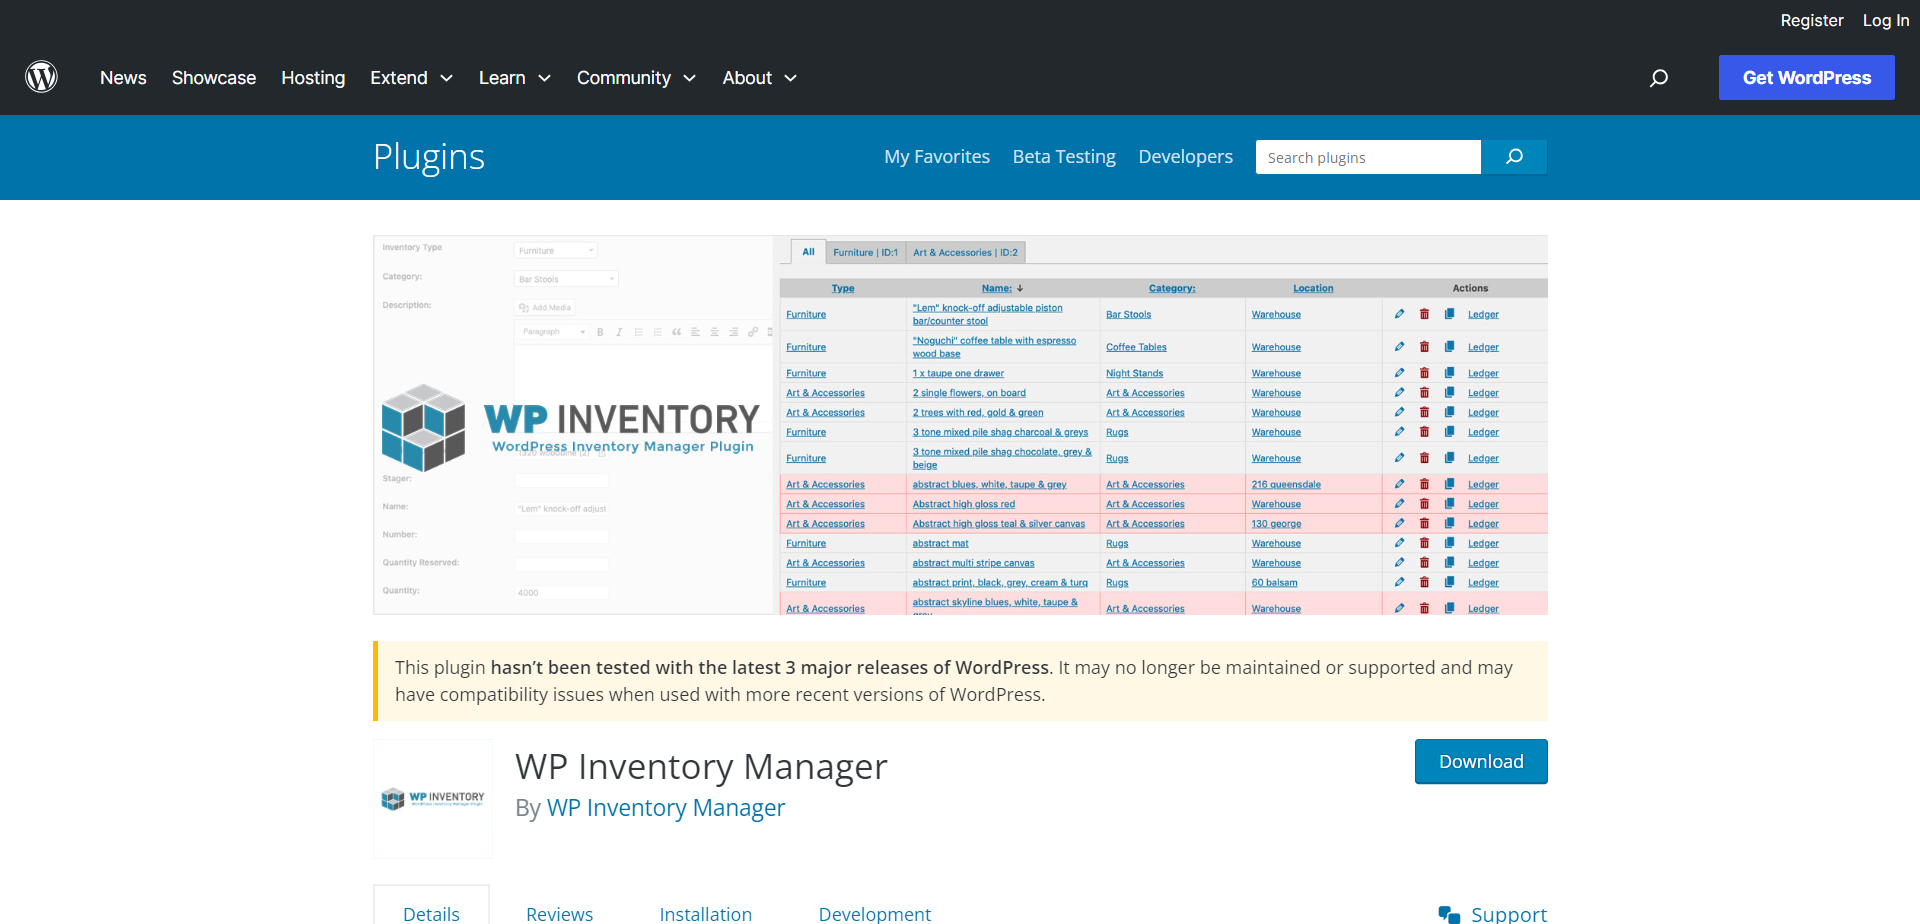 WP Inventory Manager